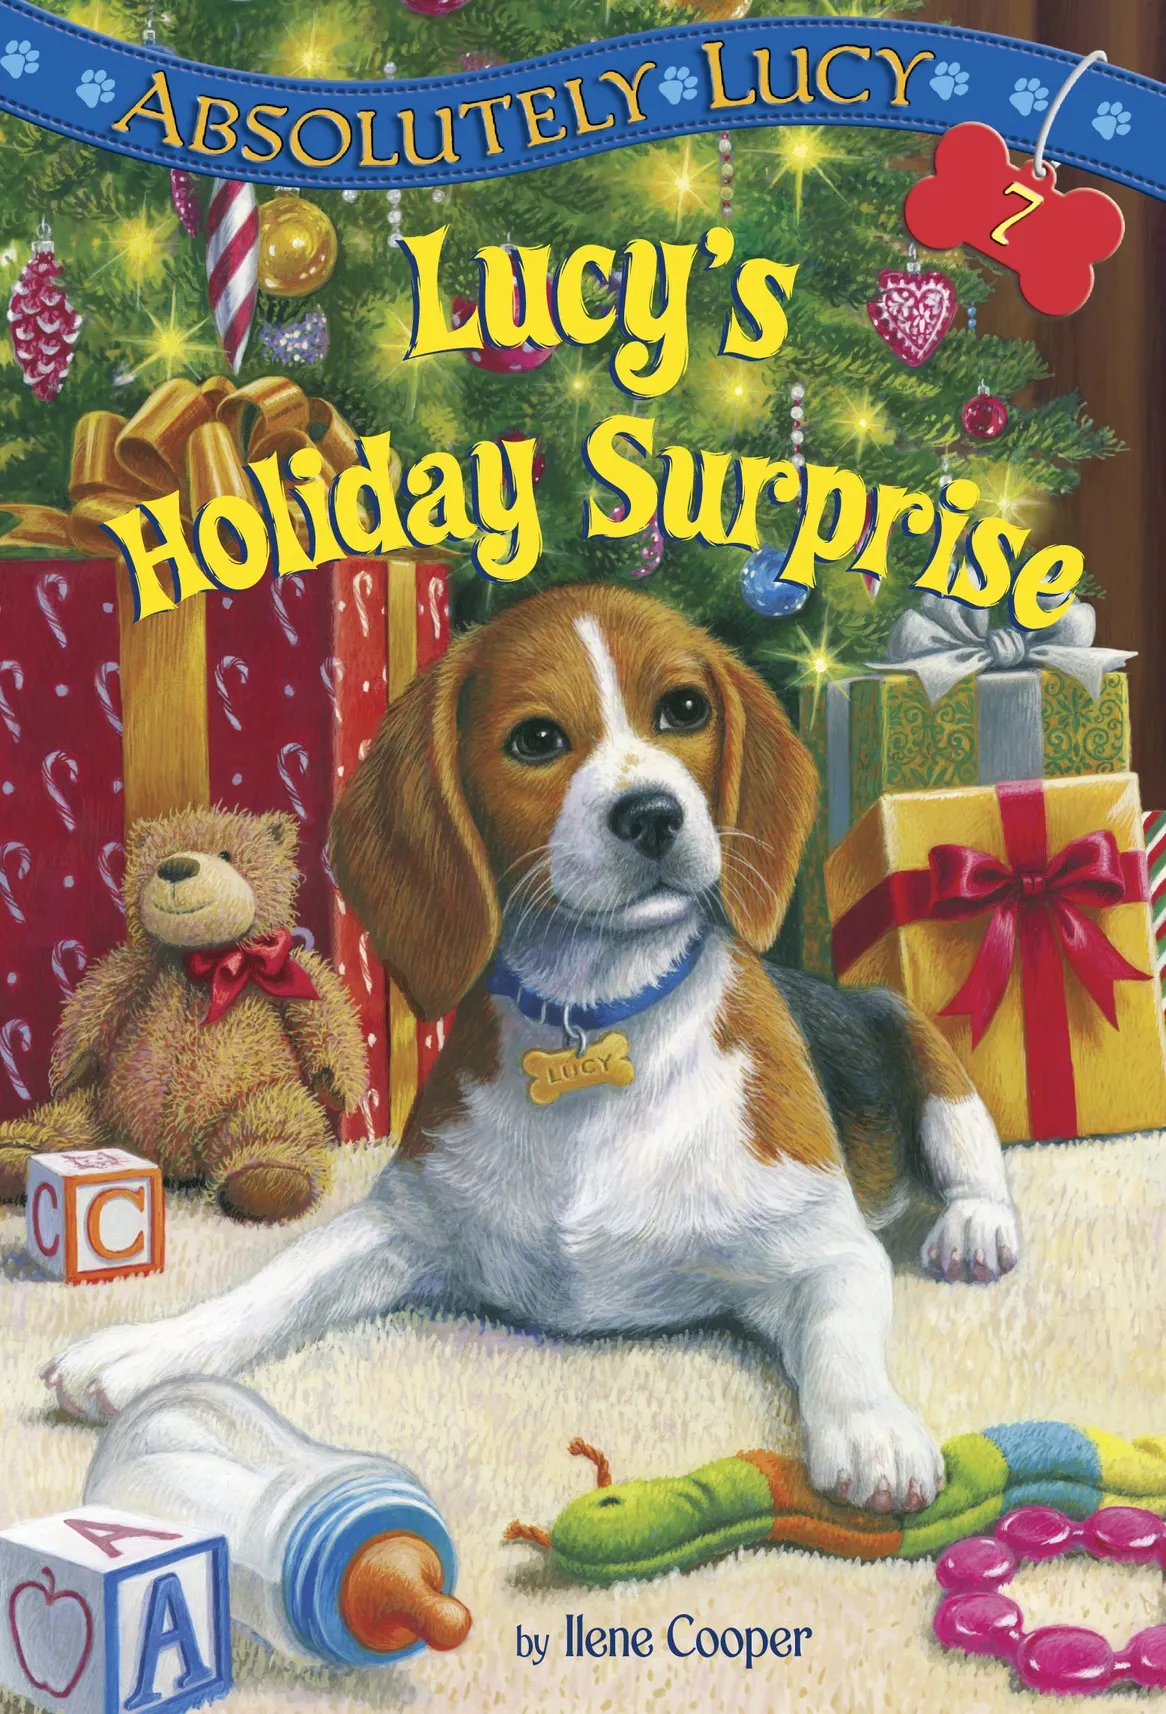 Lucy's Holiday Surprise (Absolutely Lucy #7)